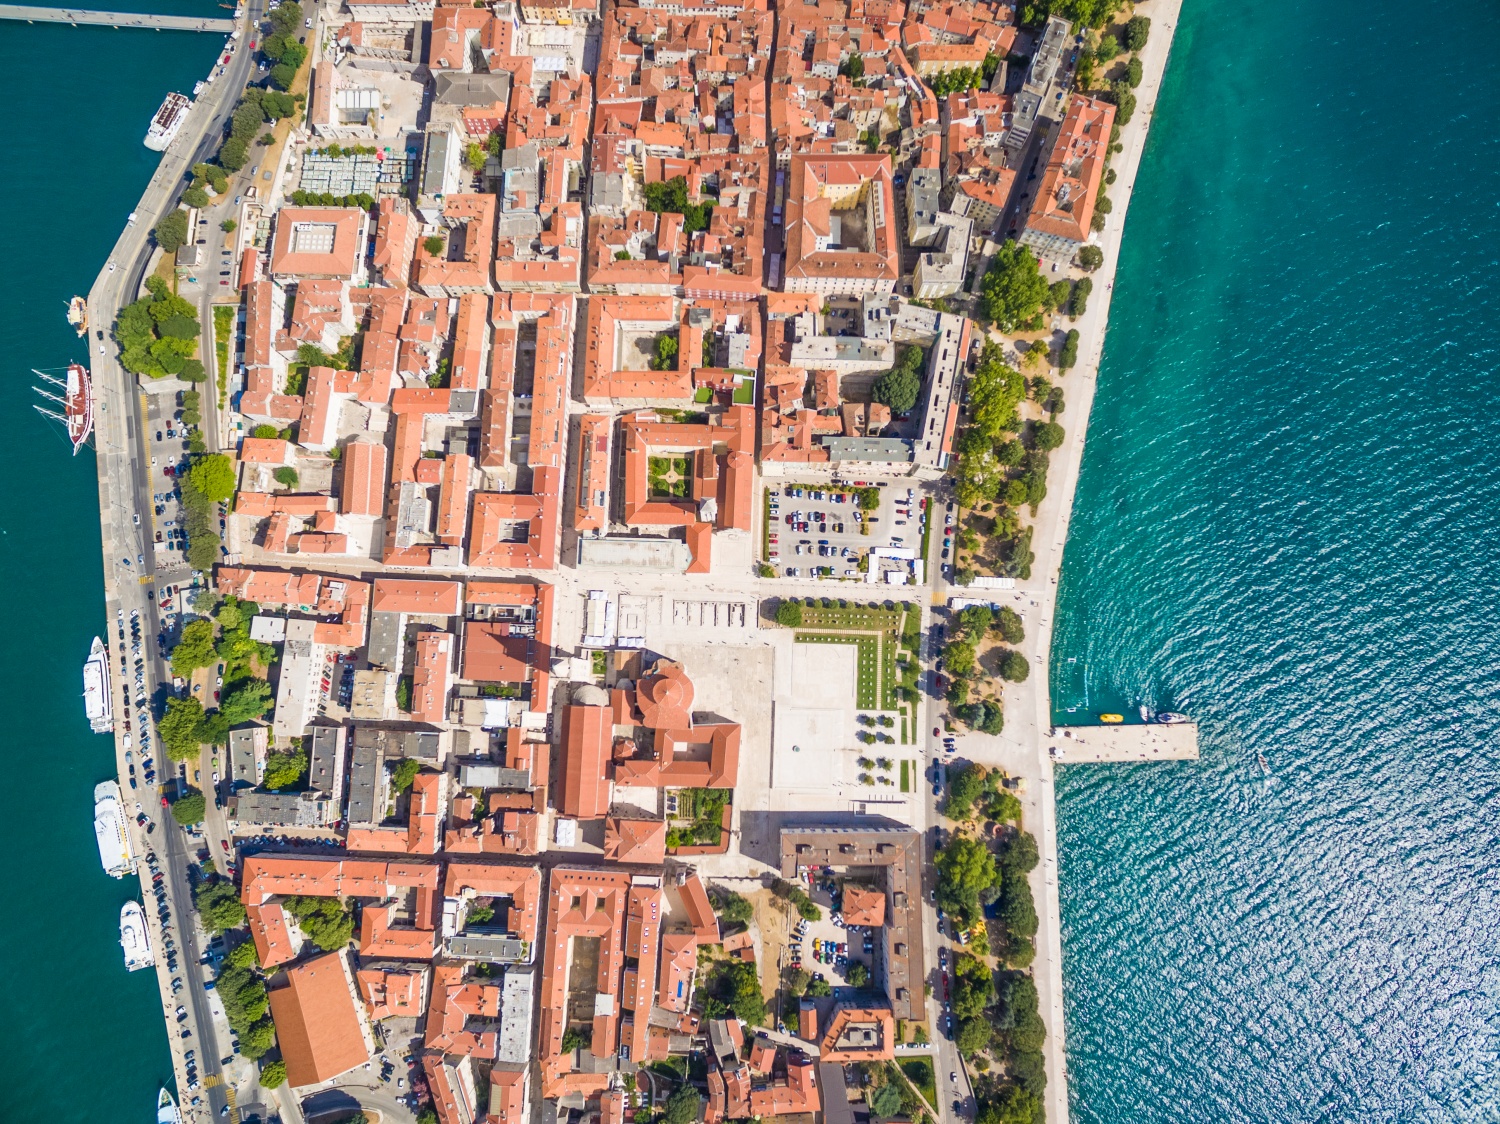 Lonely Planet declares Zadar one of the world’s top cities for 2019